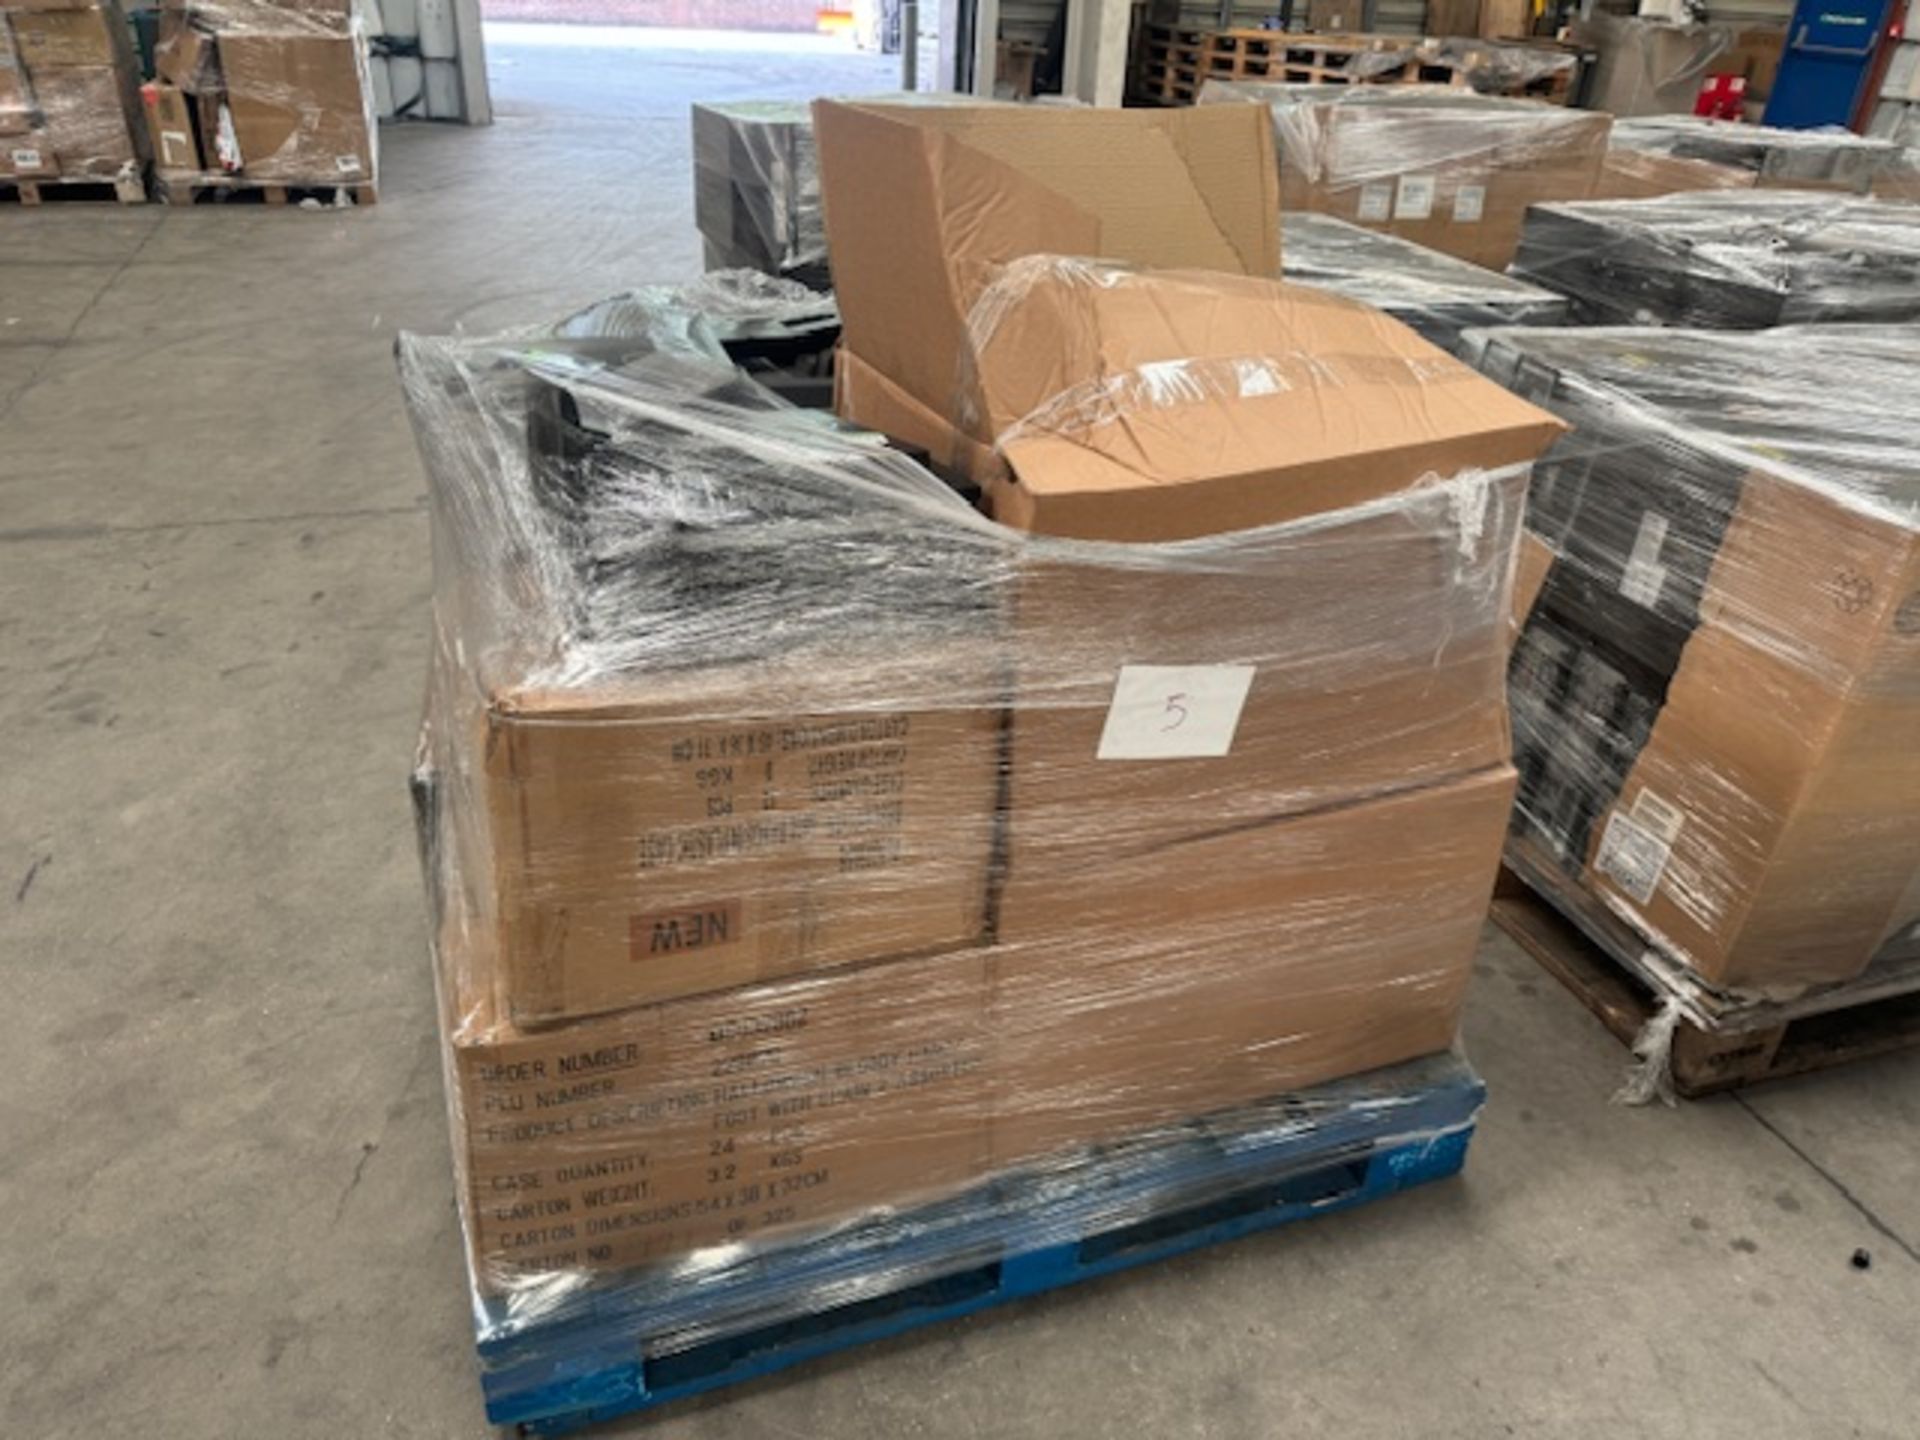 IT PALLET LOT INCLUDING DELL MONITORS, KEYBOARDS, LAPTOPS AND MUCH MORE PRICE NEW 6K